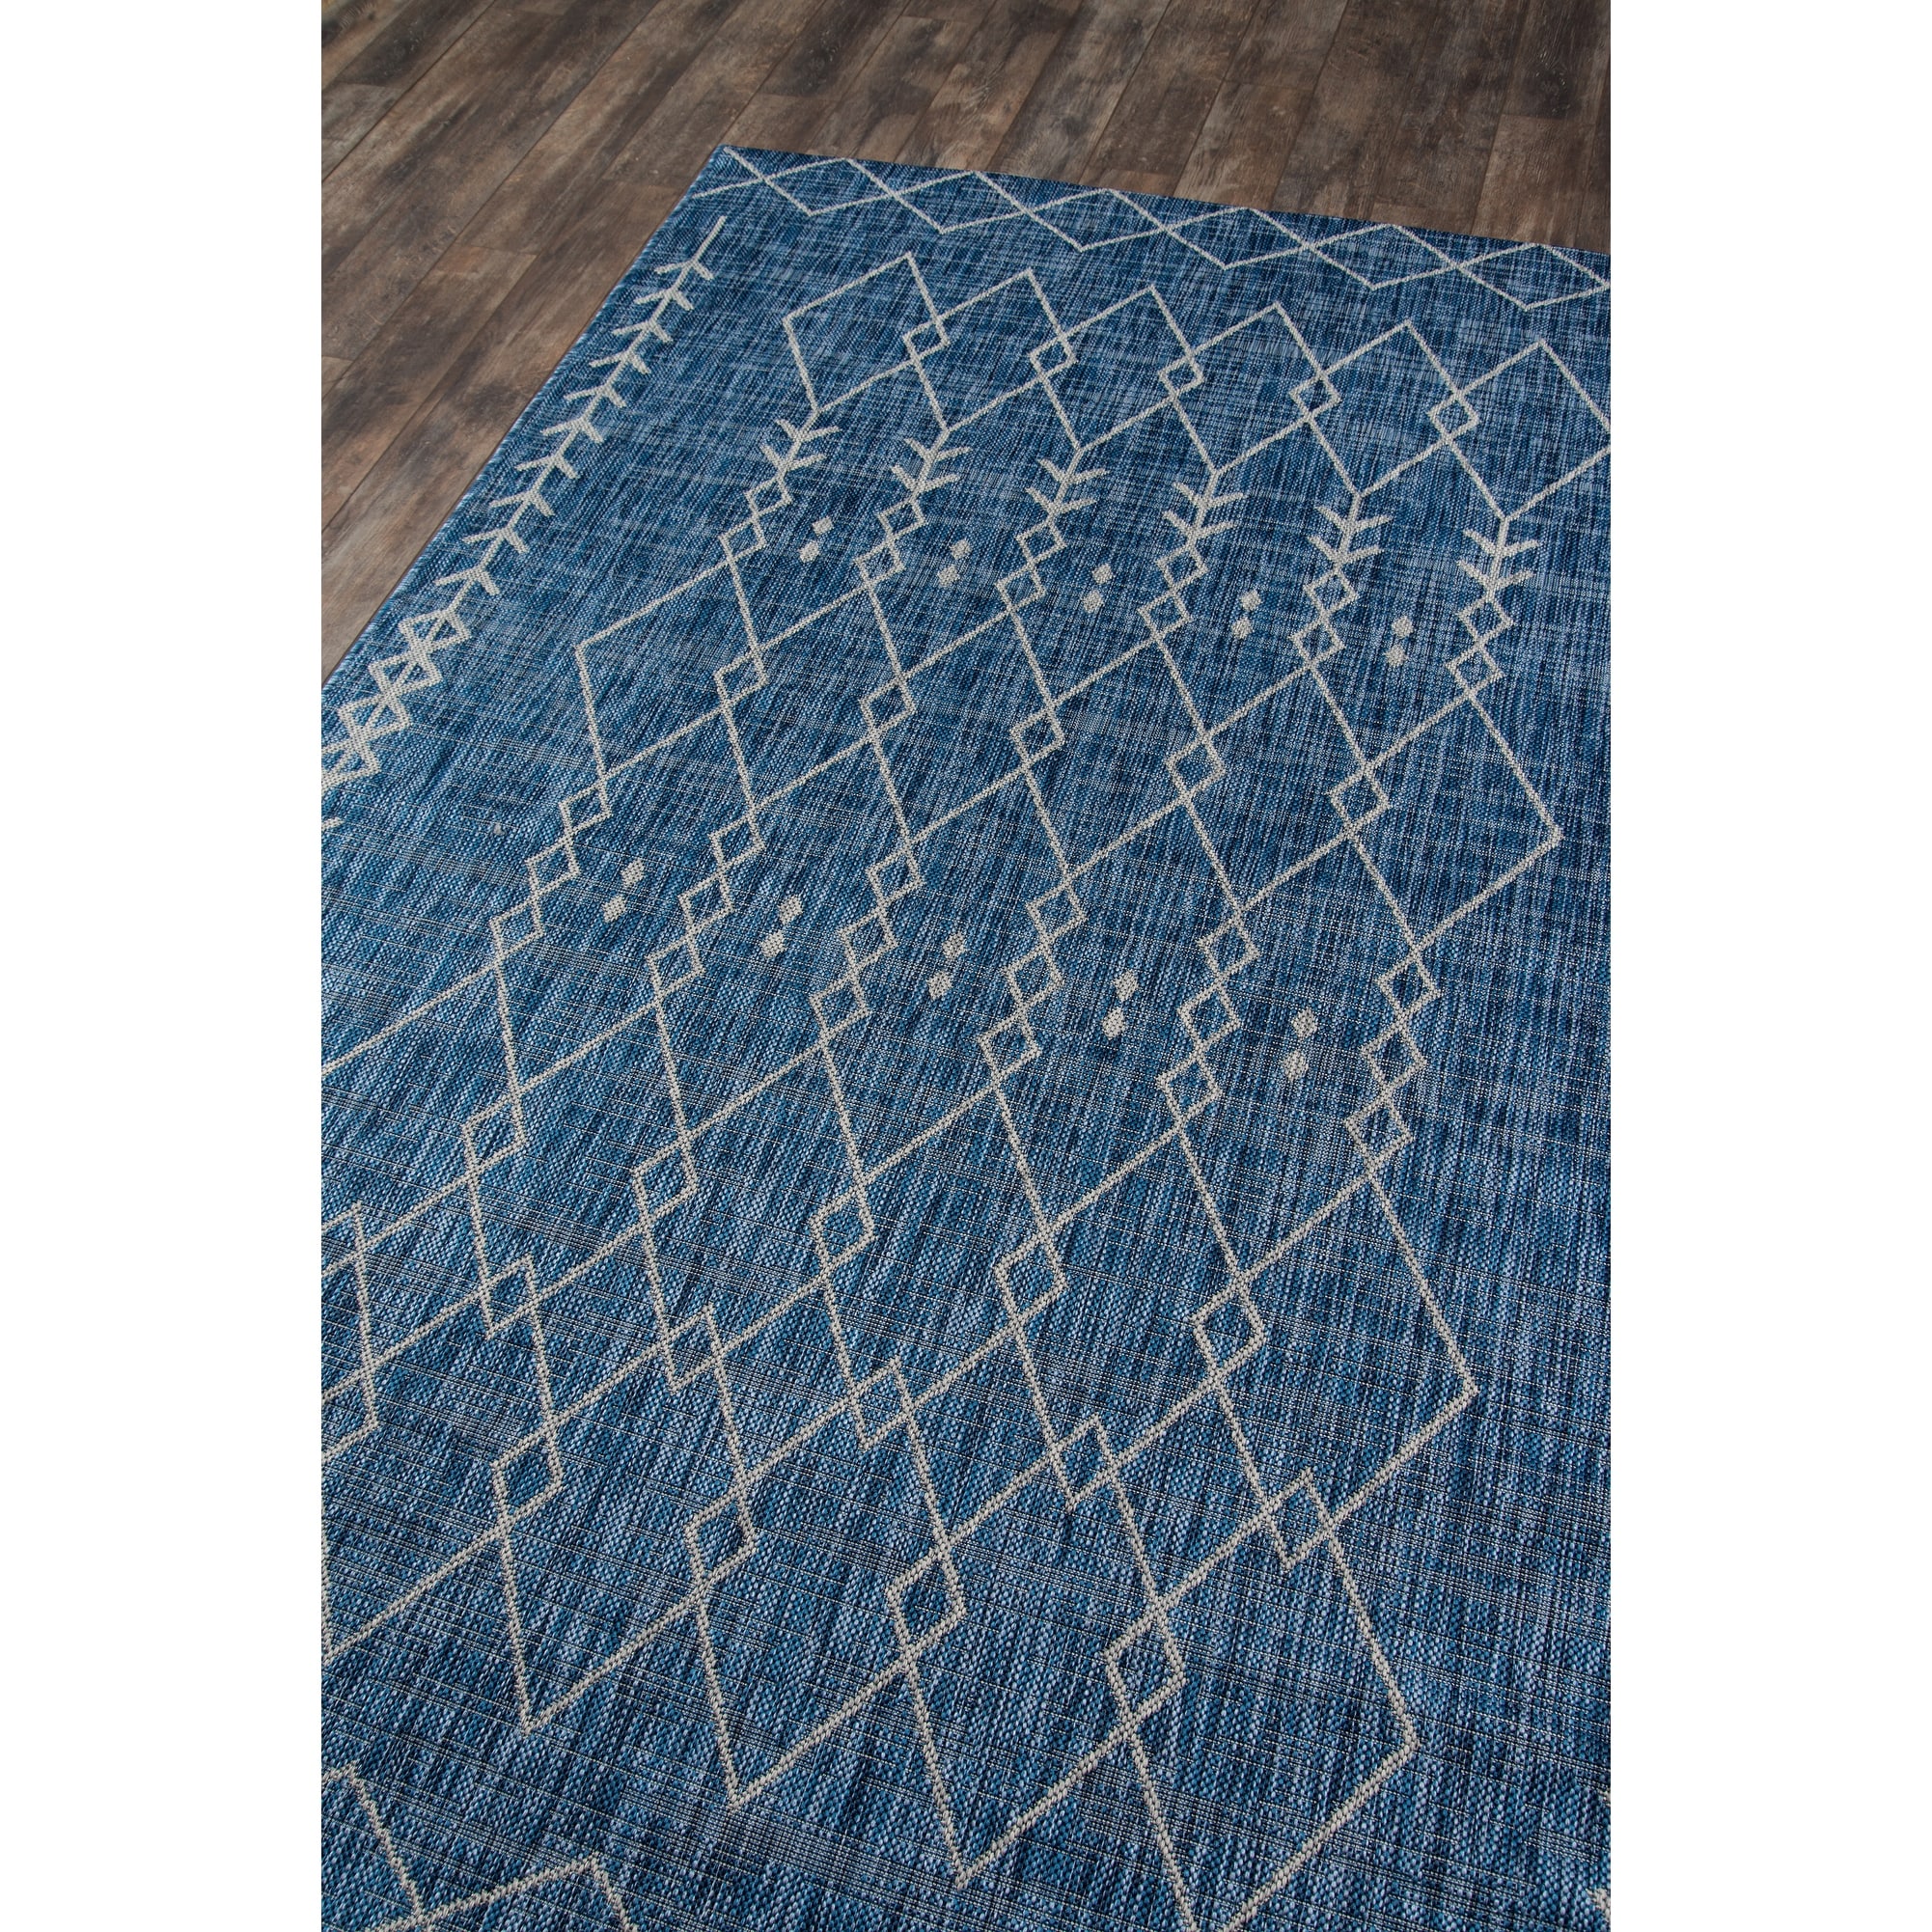 Machine Made Blue Blue Indoor/Outdoor Rugs - image 2 of 5